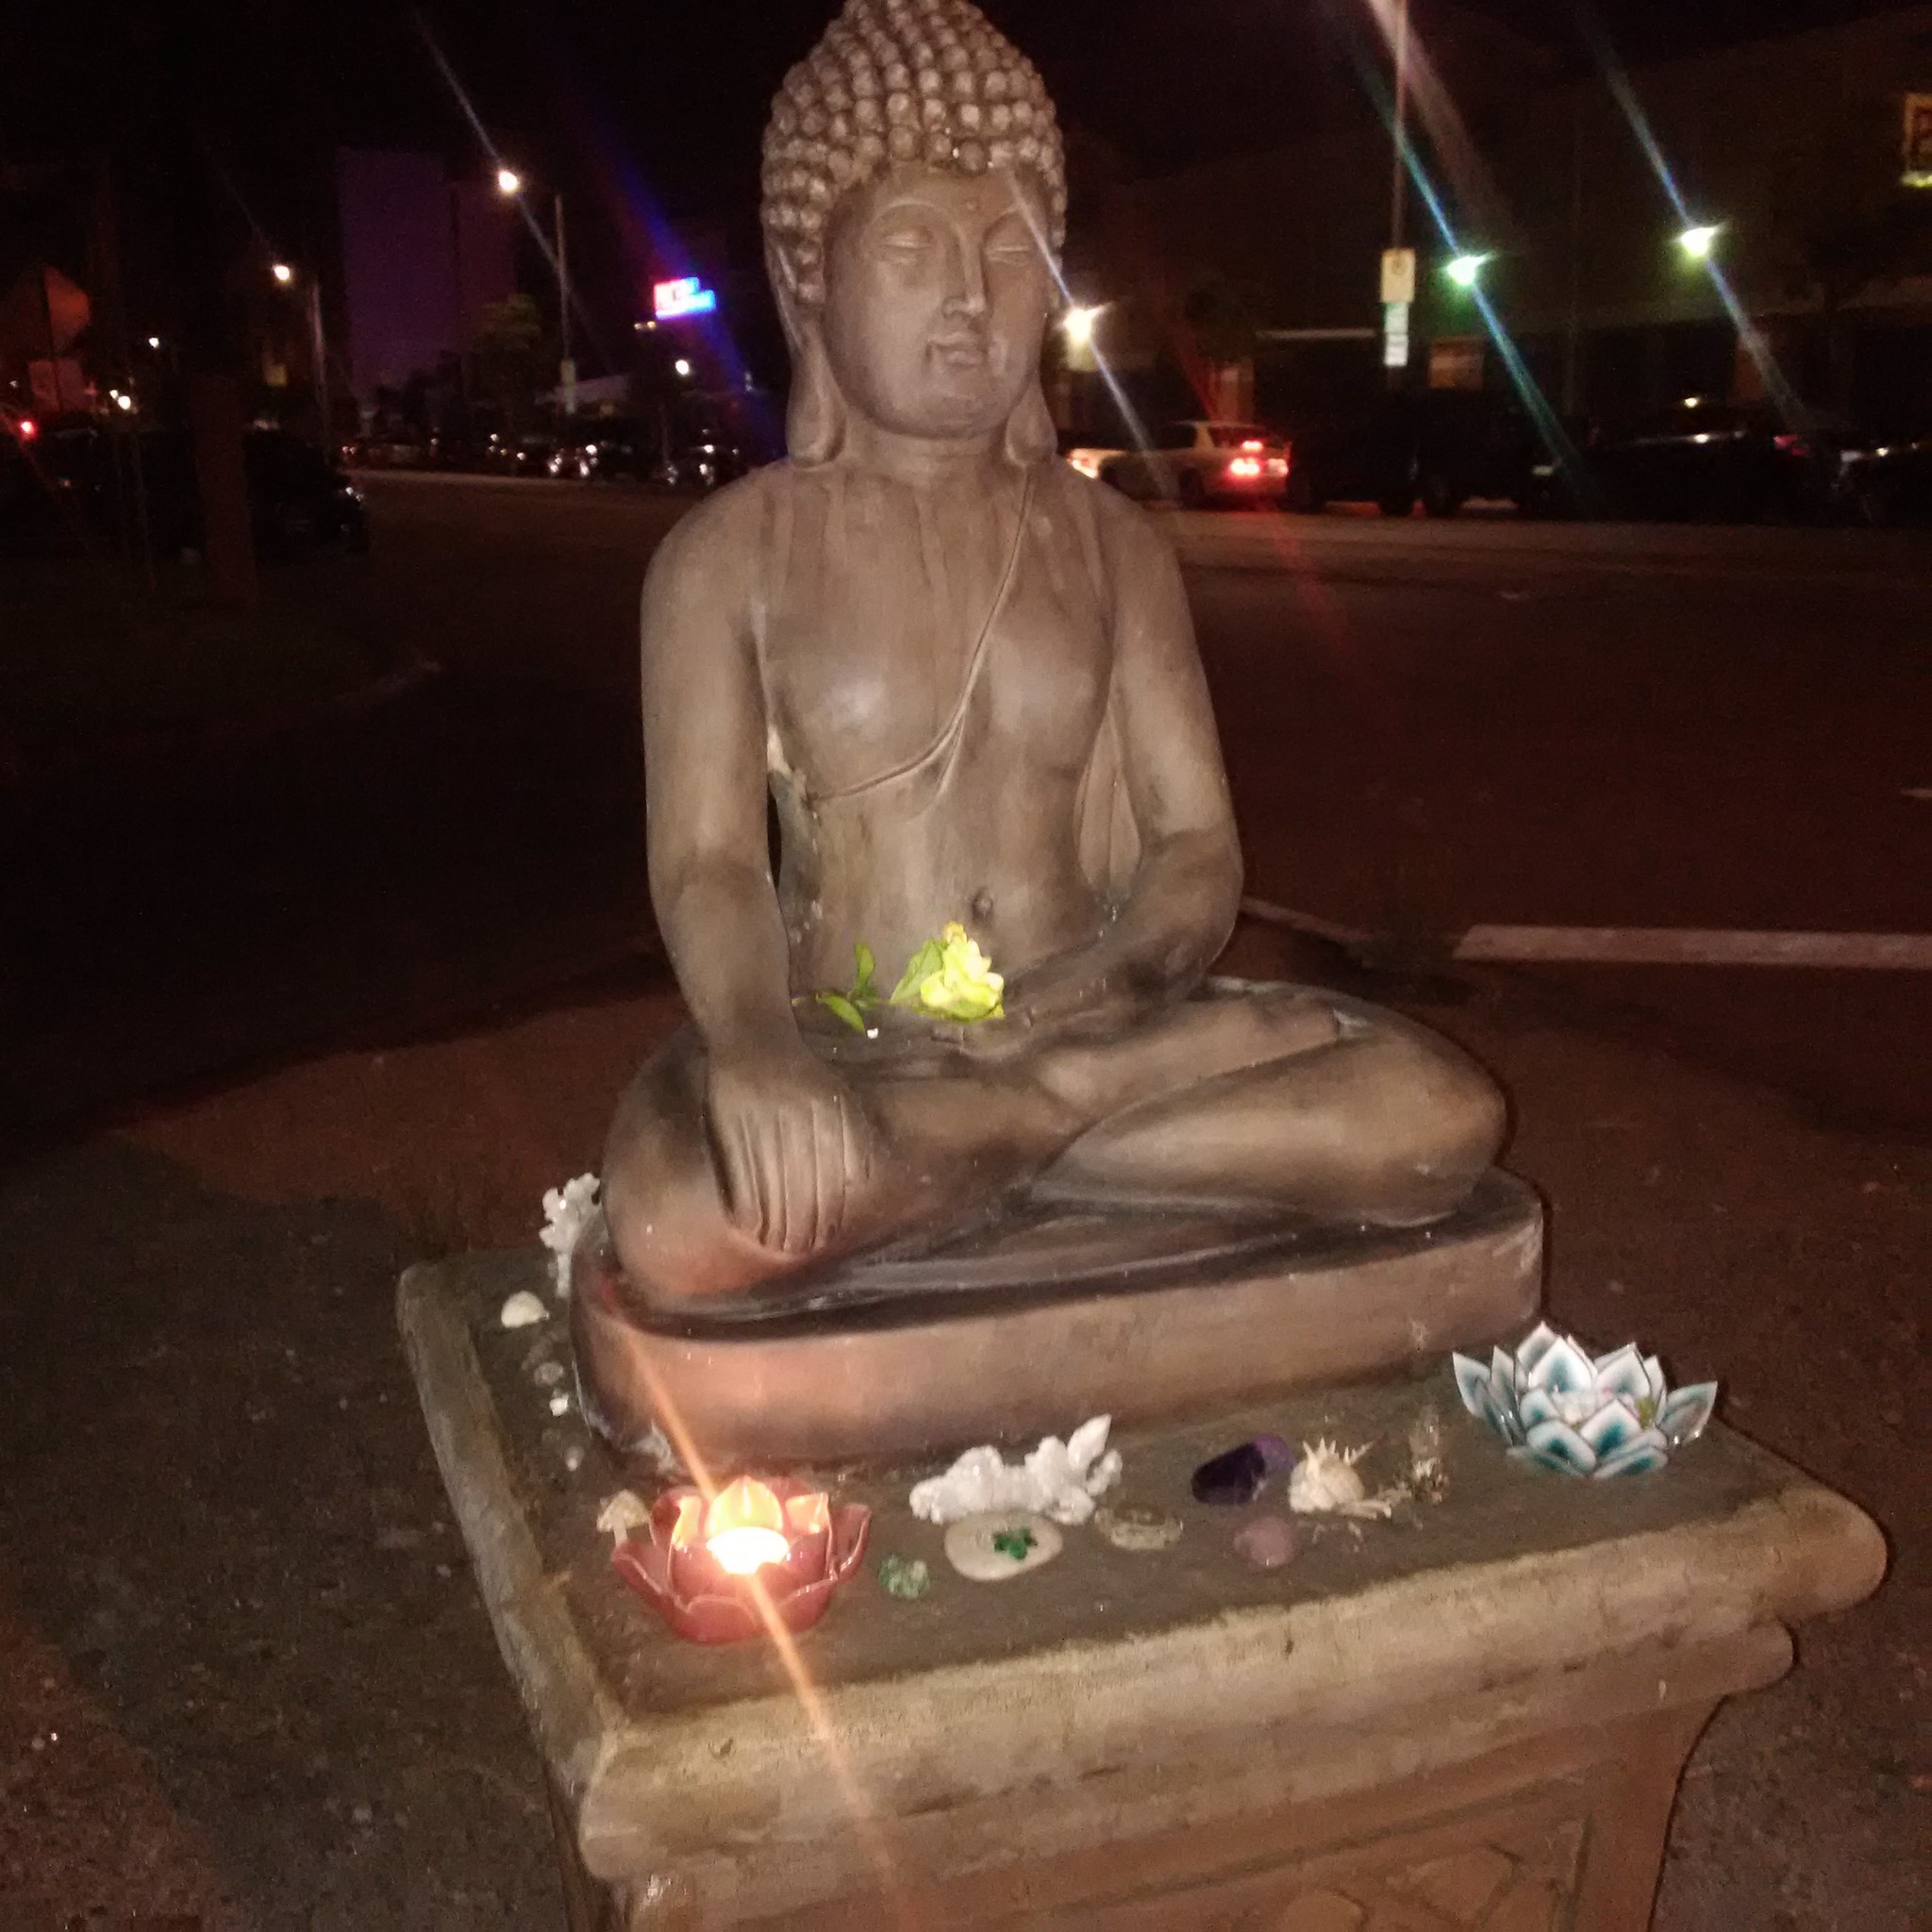 After years of bulky items being left on a traffic island in Palms, someone put a Buddha statue there. Residents treasure the statue, which has been vandalized multiple times.